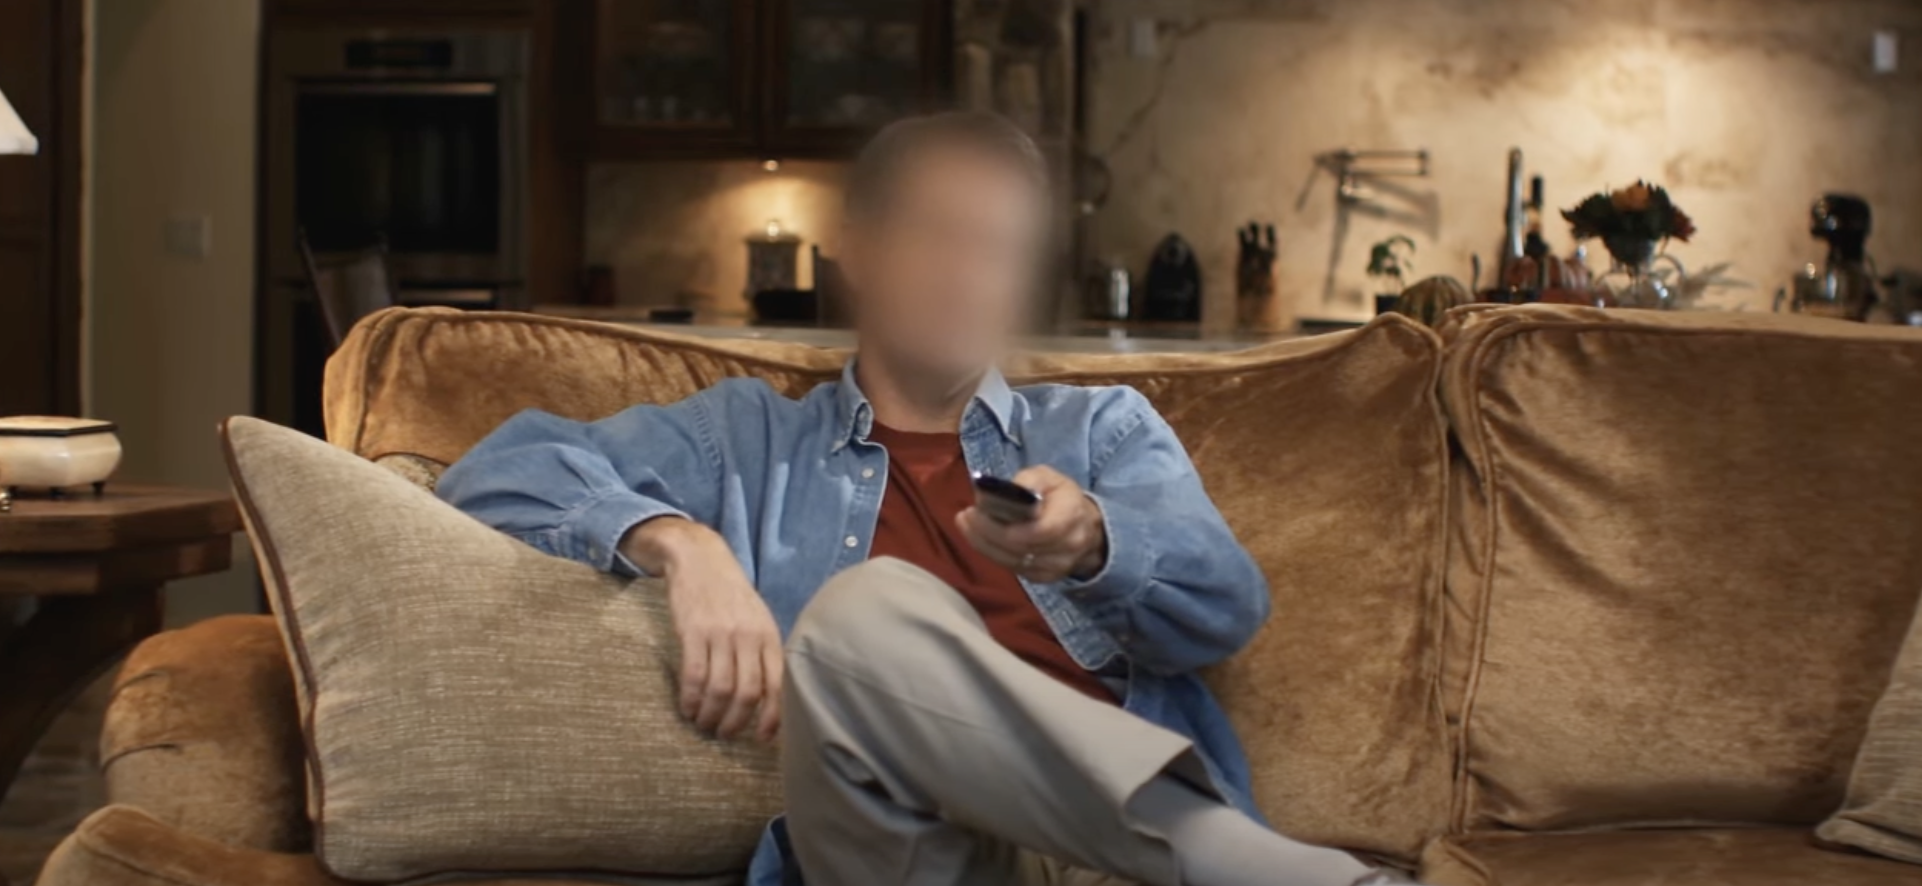 Person relaxing on a sofa holding a remote control with blurred face for privacy